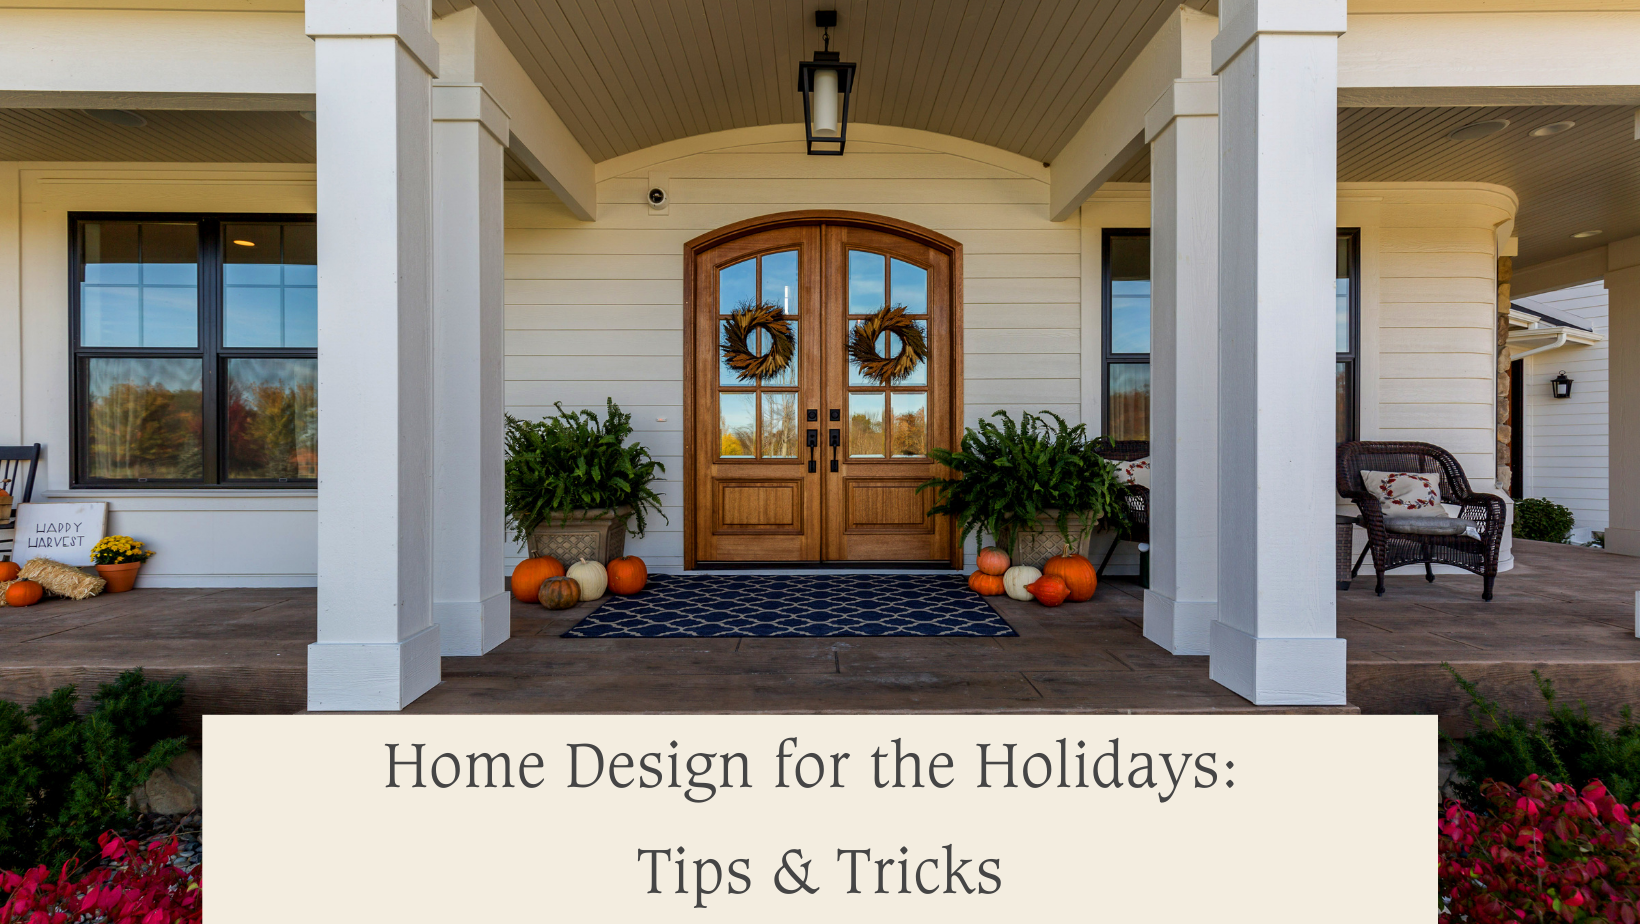 Home Design for the Holidays: Tips and Tricks